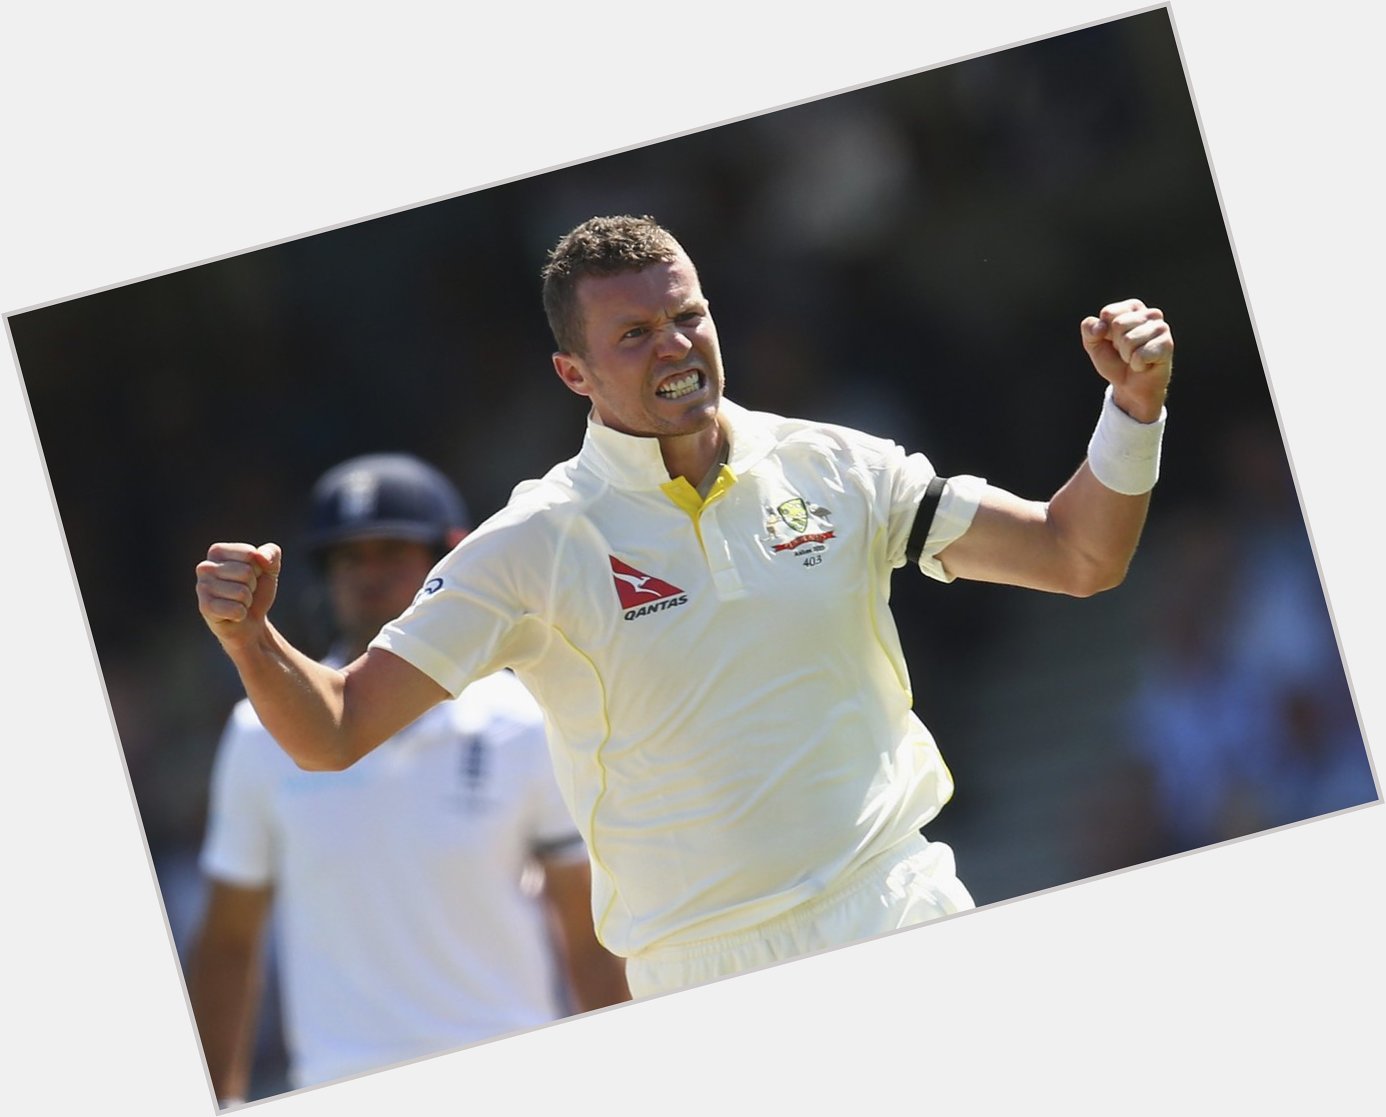 What is
Peter siddle greatest moment in a Australian shirt so far? Happy Birthday to the aggressive seamer! 